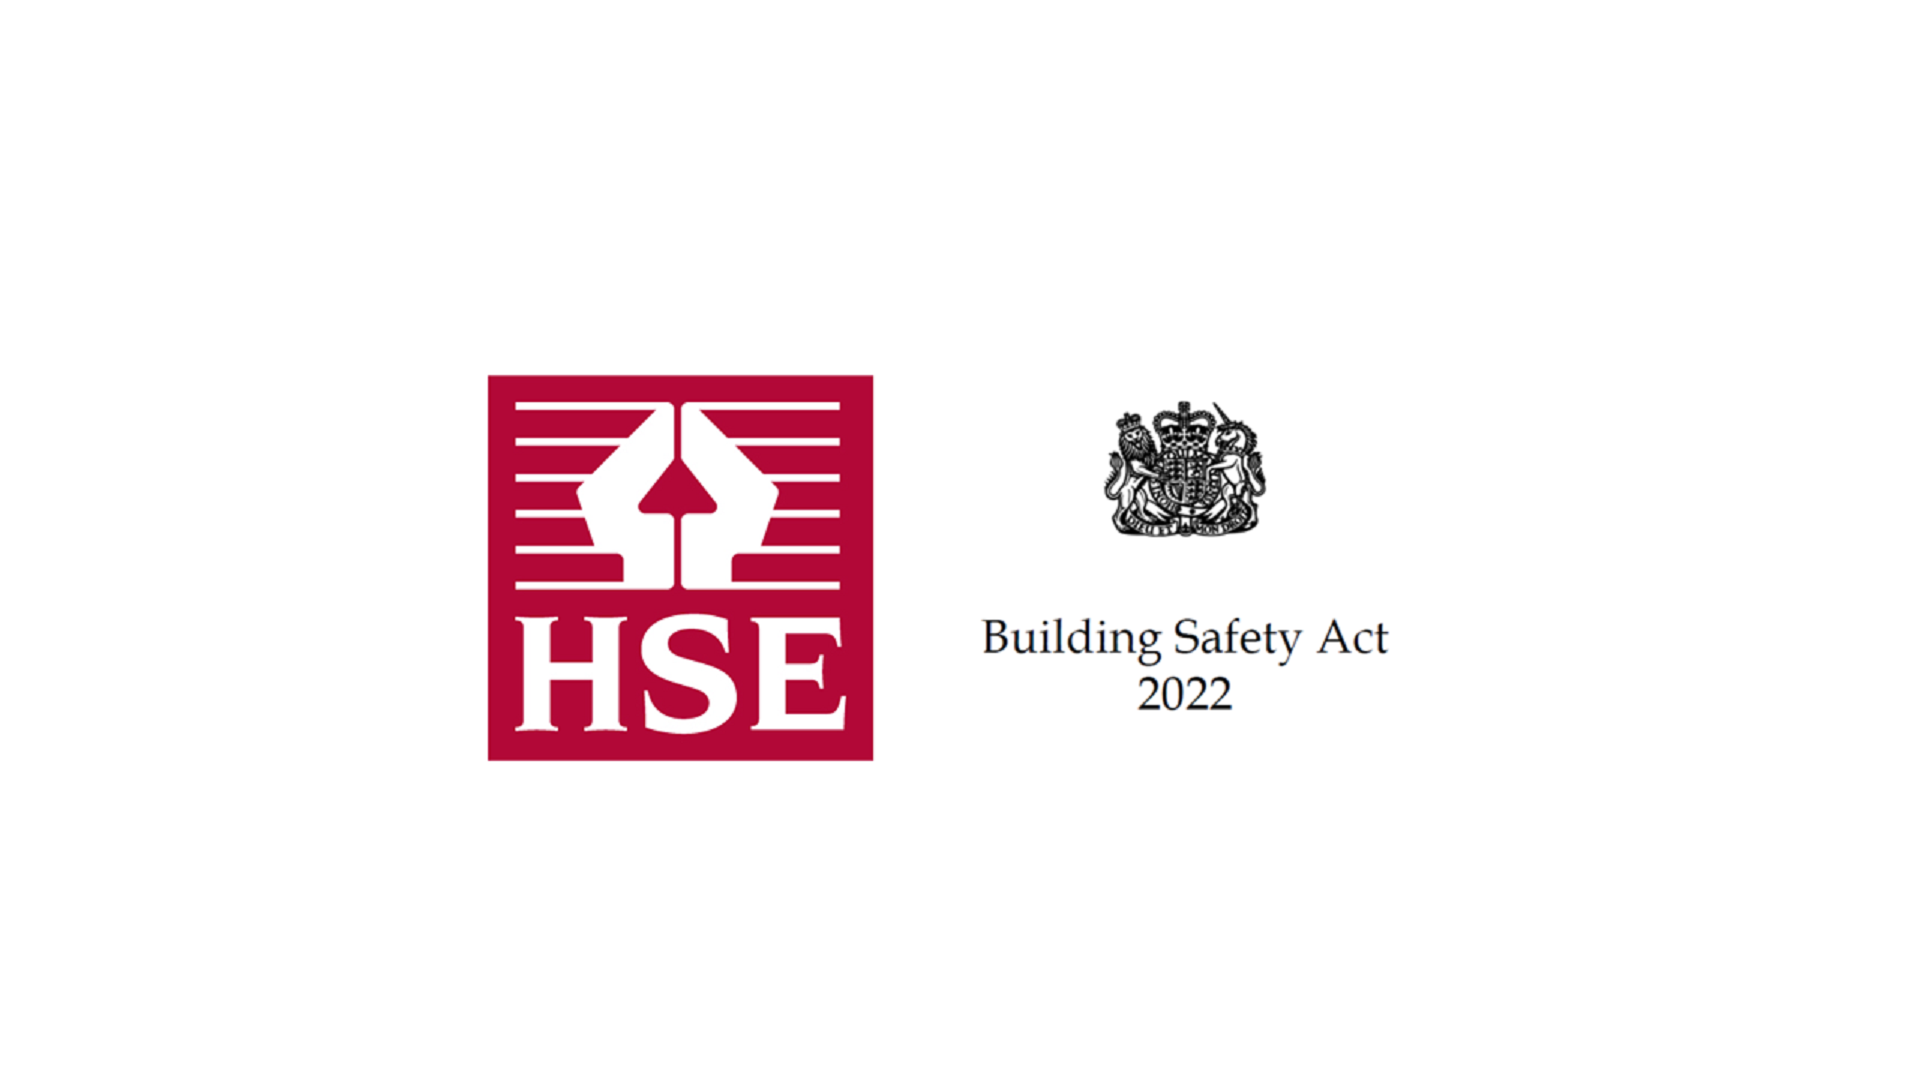 https://www.de-groupcontracting.com/wp-content/uploads/2023/05/building-safety-act.png